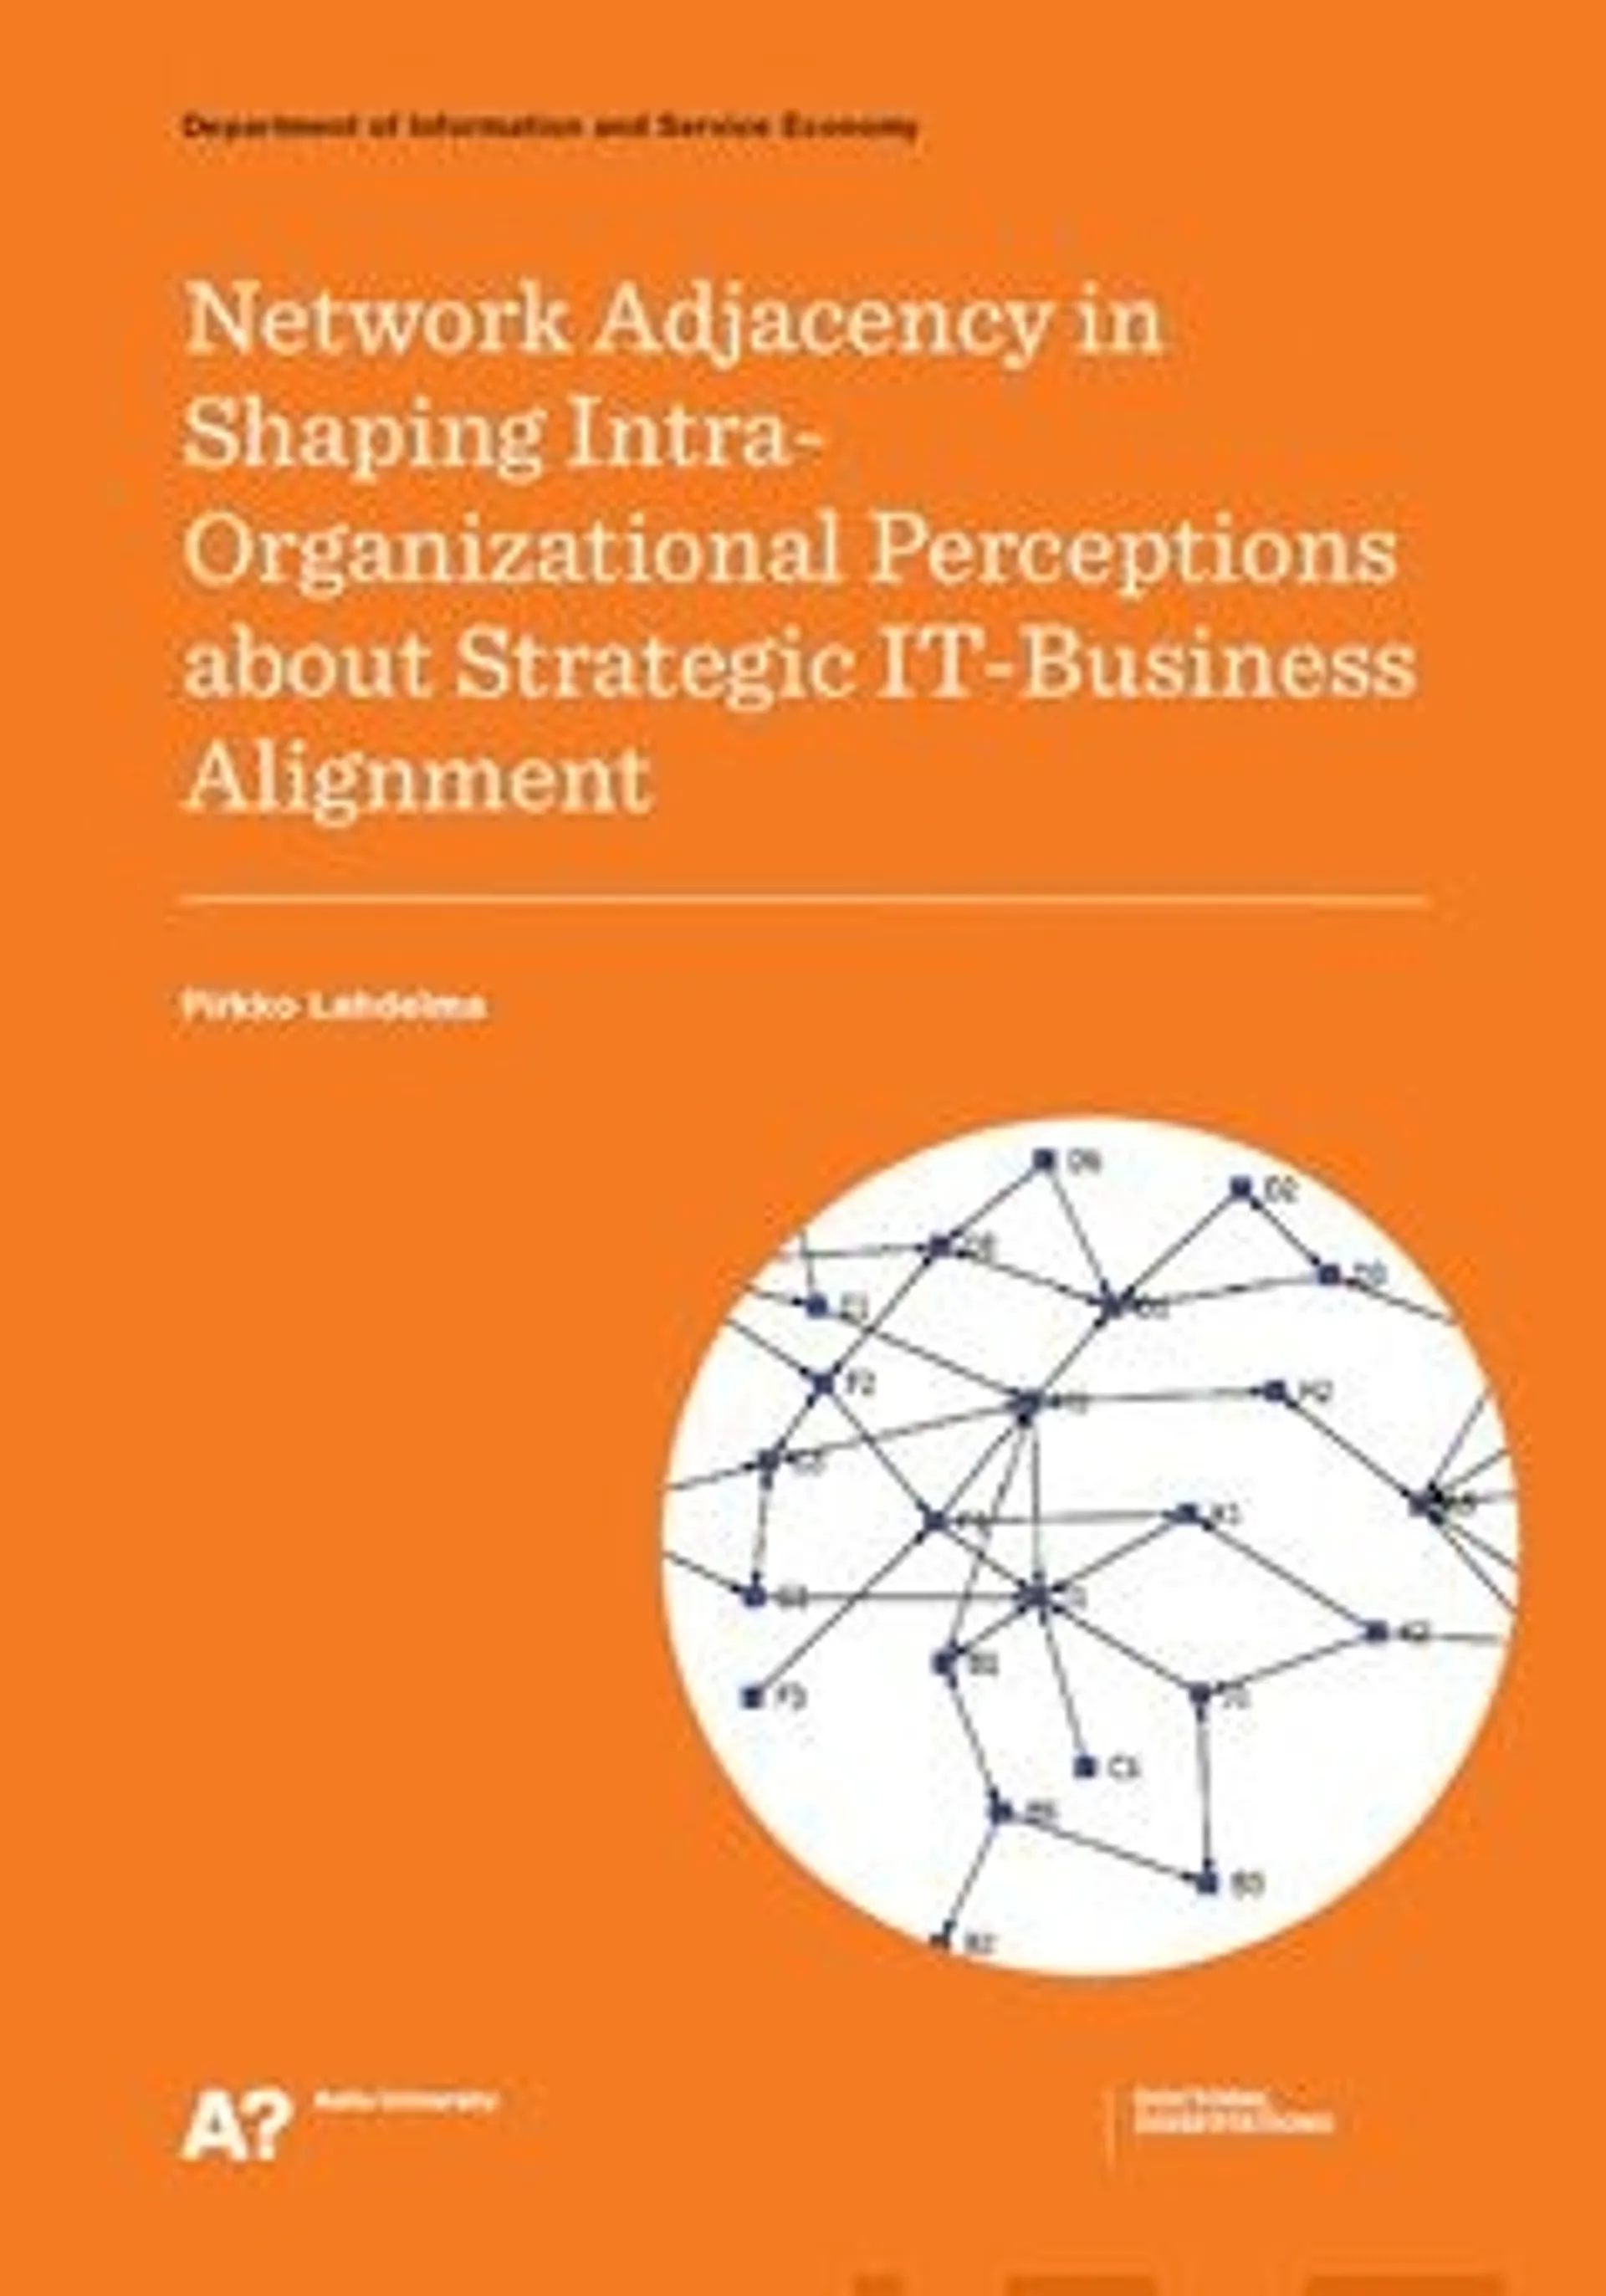 Lahdelma, Network Adjacency in Shaping Intra-Organizational Perceptions about Strategic IT-Business Alingment